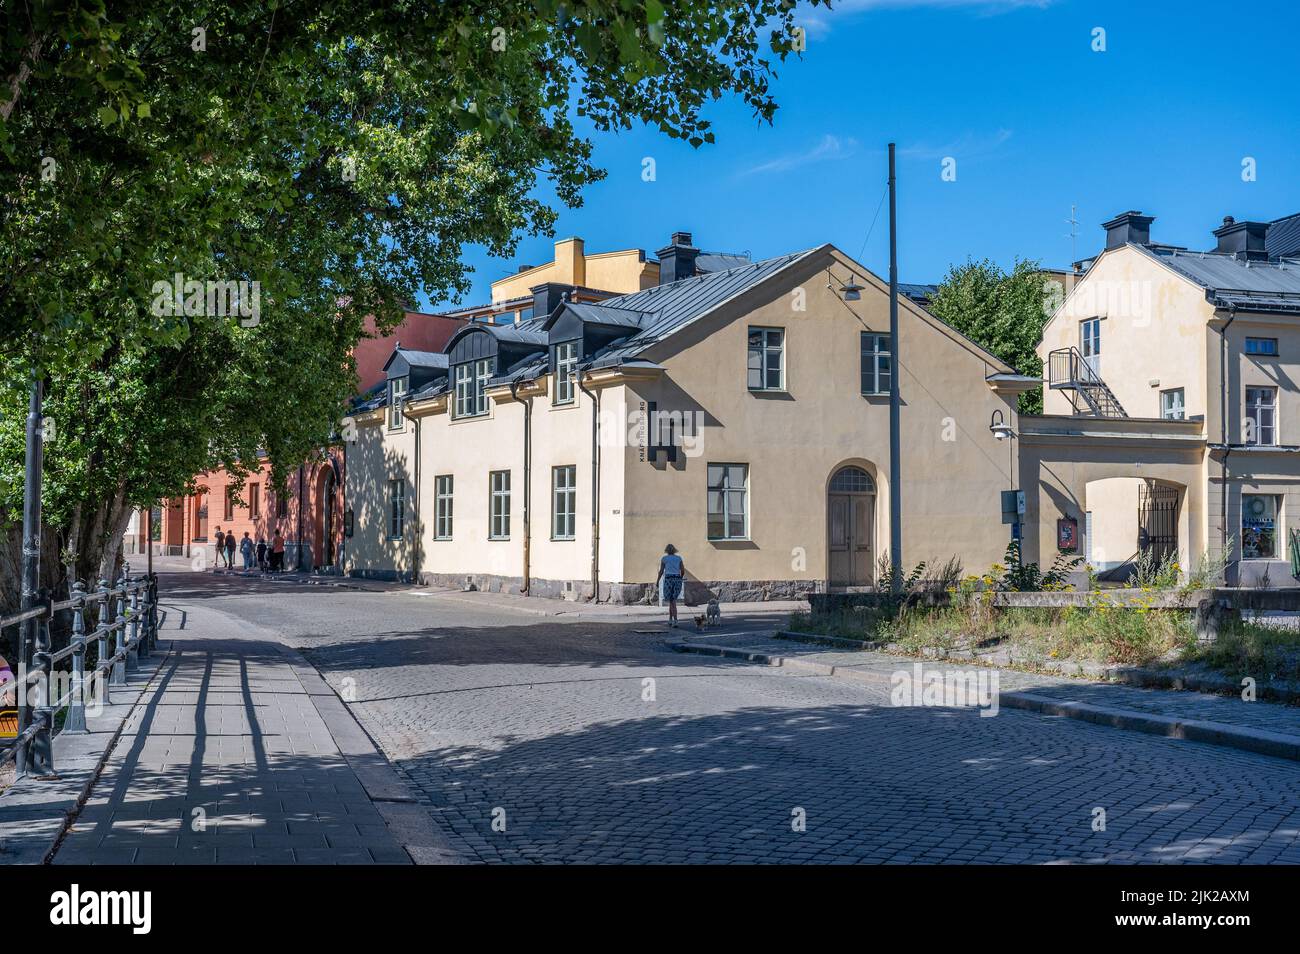 Residential street Dalsgatan and historic city block Knäppingsborg in the city centre of Norrkoping, Sweden. Stock Photo